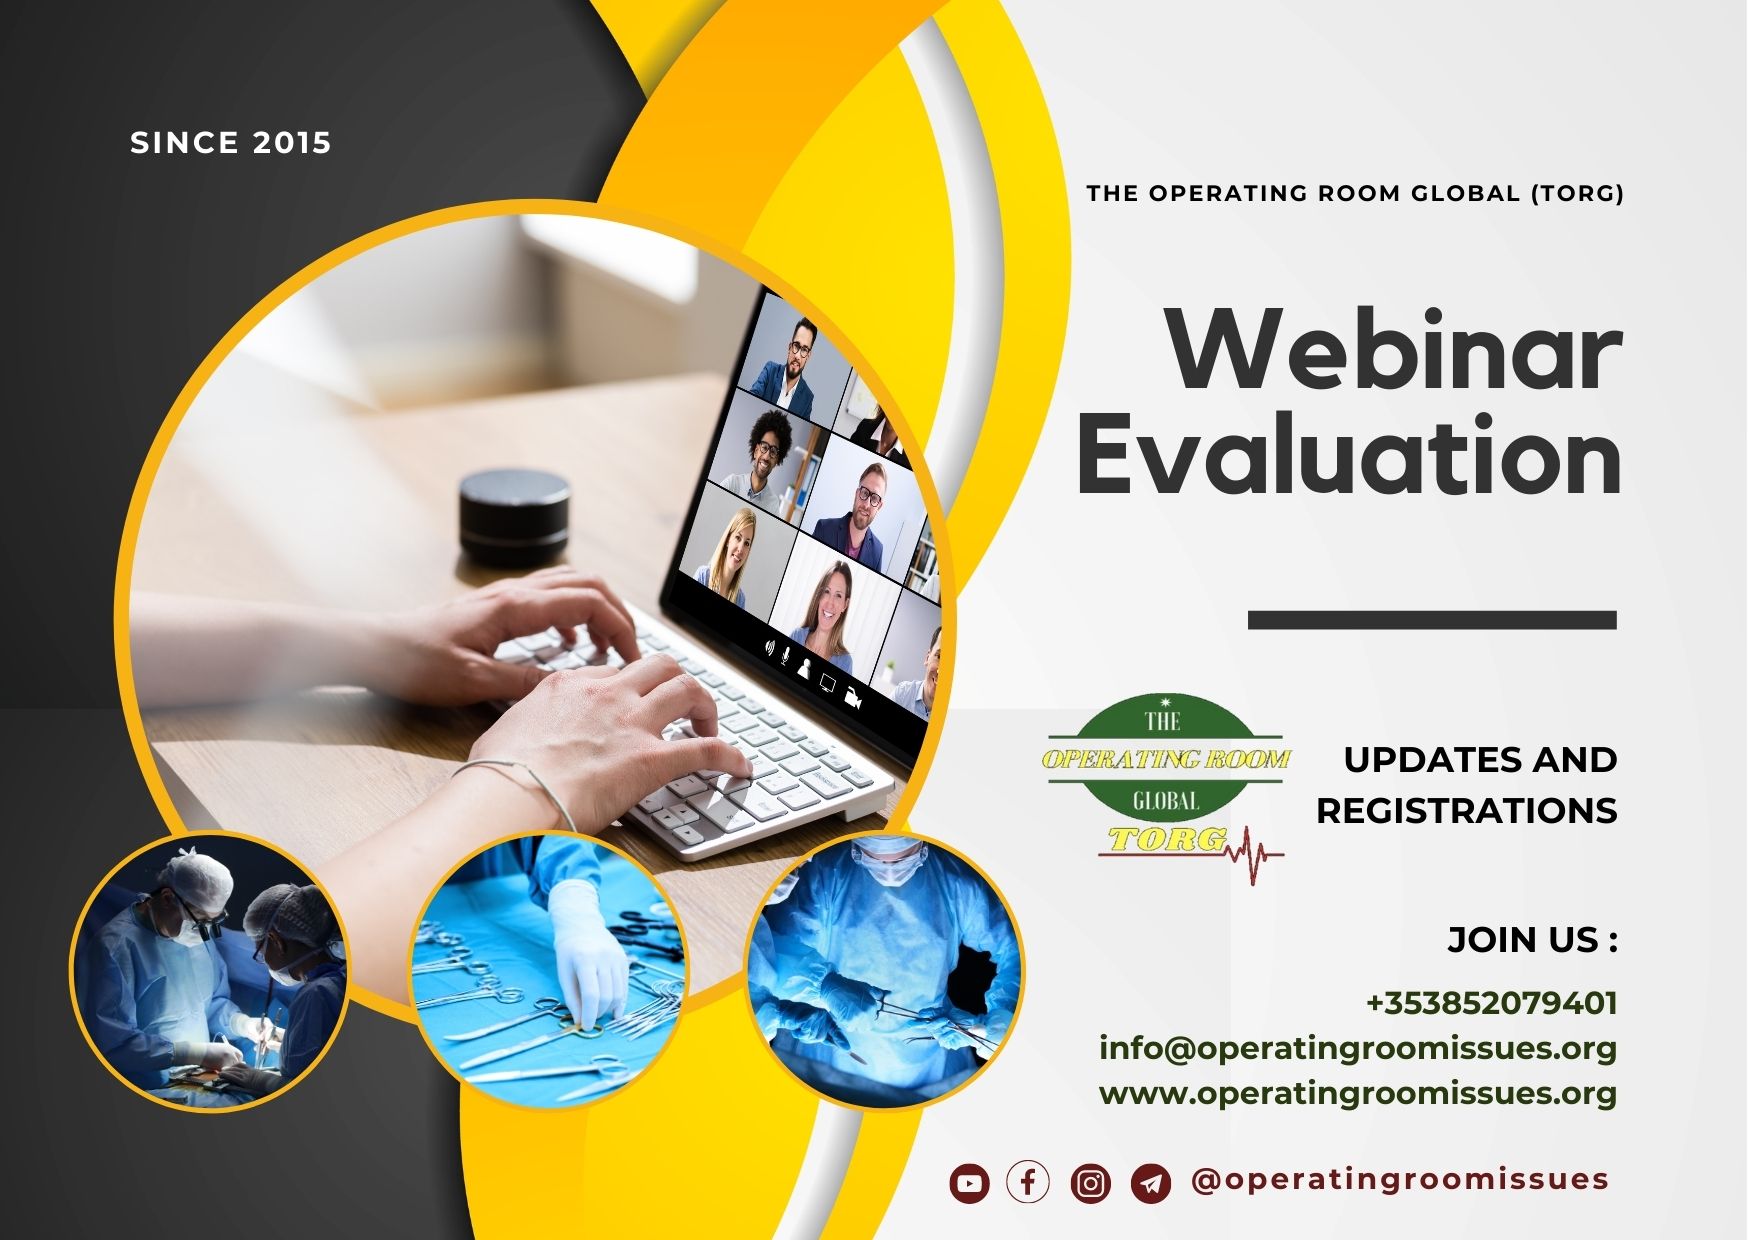 Webinar Evaluation and Certification – Thank you for attending our recent webinar.